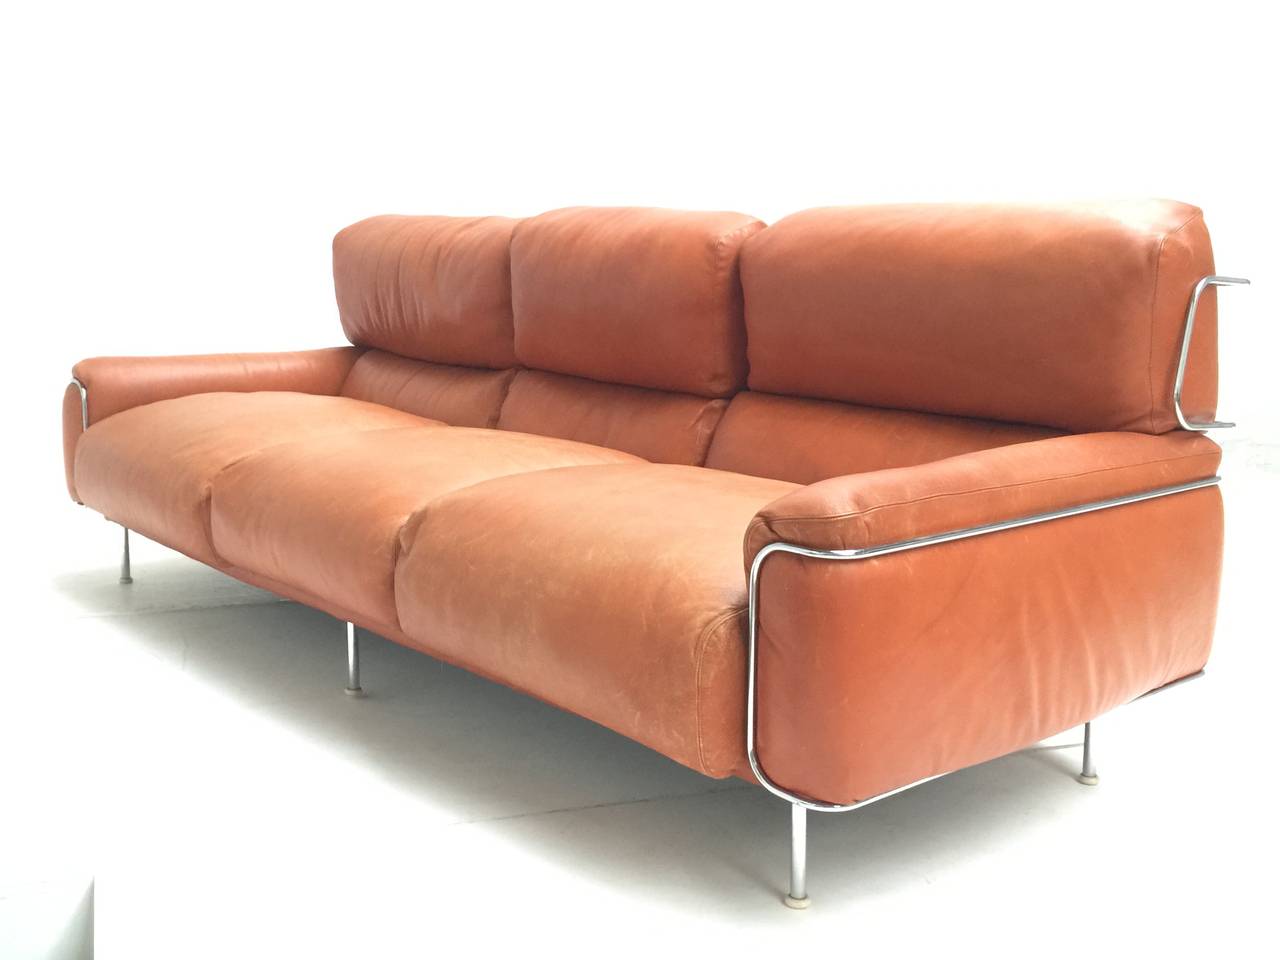 Very rare find, super rare and elegant three-seat sofa by Italian designer Vittorio Introini for Saporiti. The supporting frame is made of chromed steel. This sofa was designed in 1968 and is published in the italian design periodical Abitare, issue